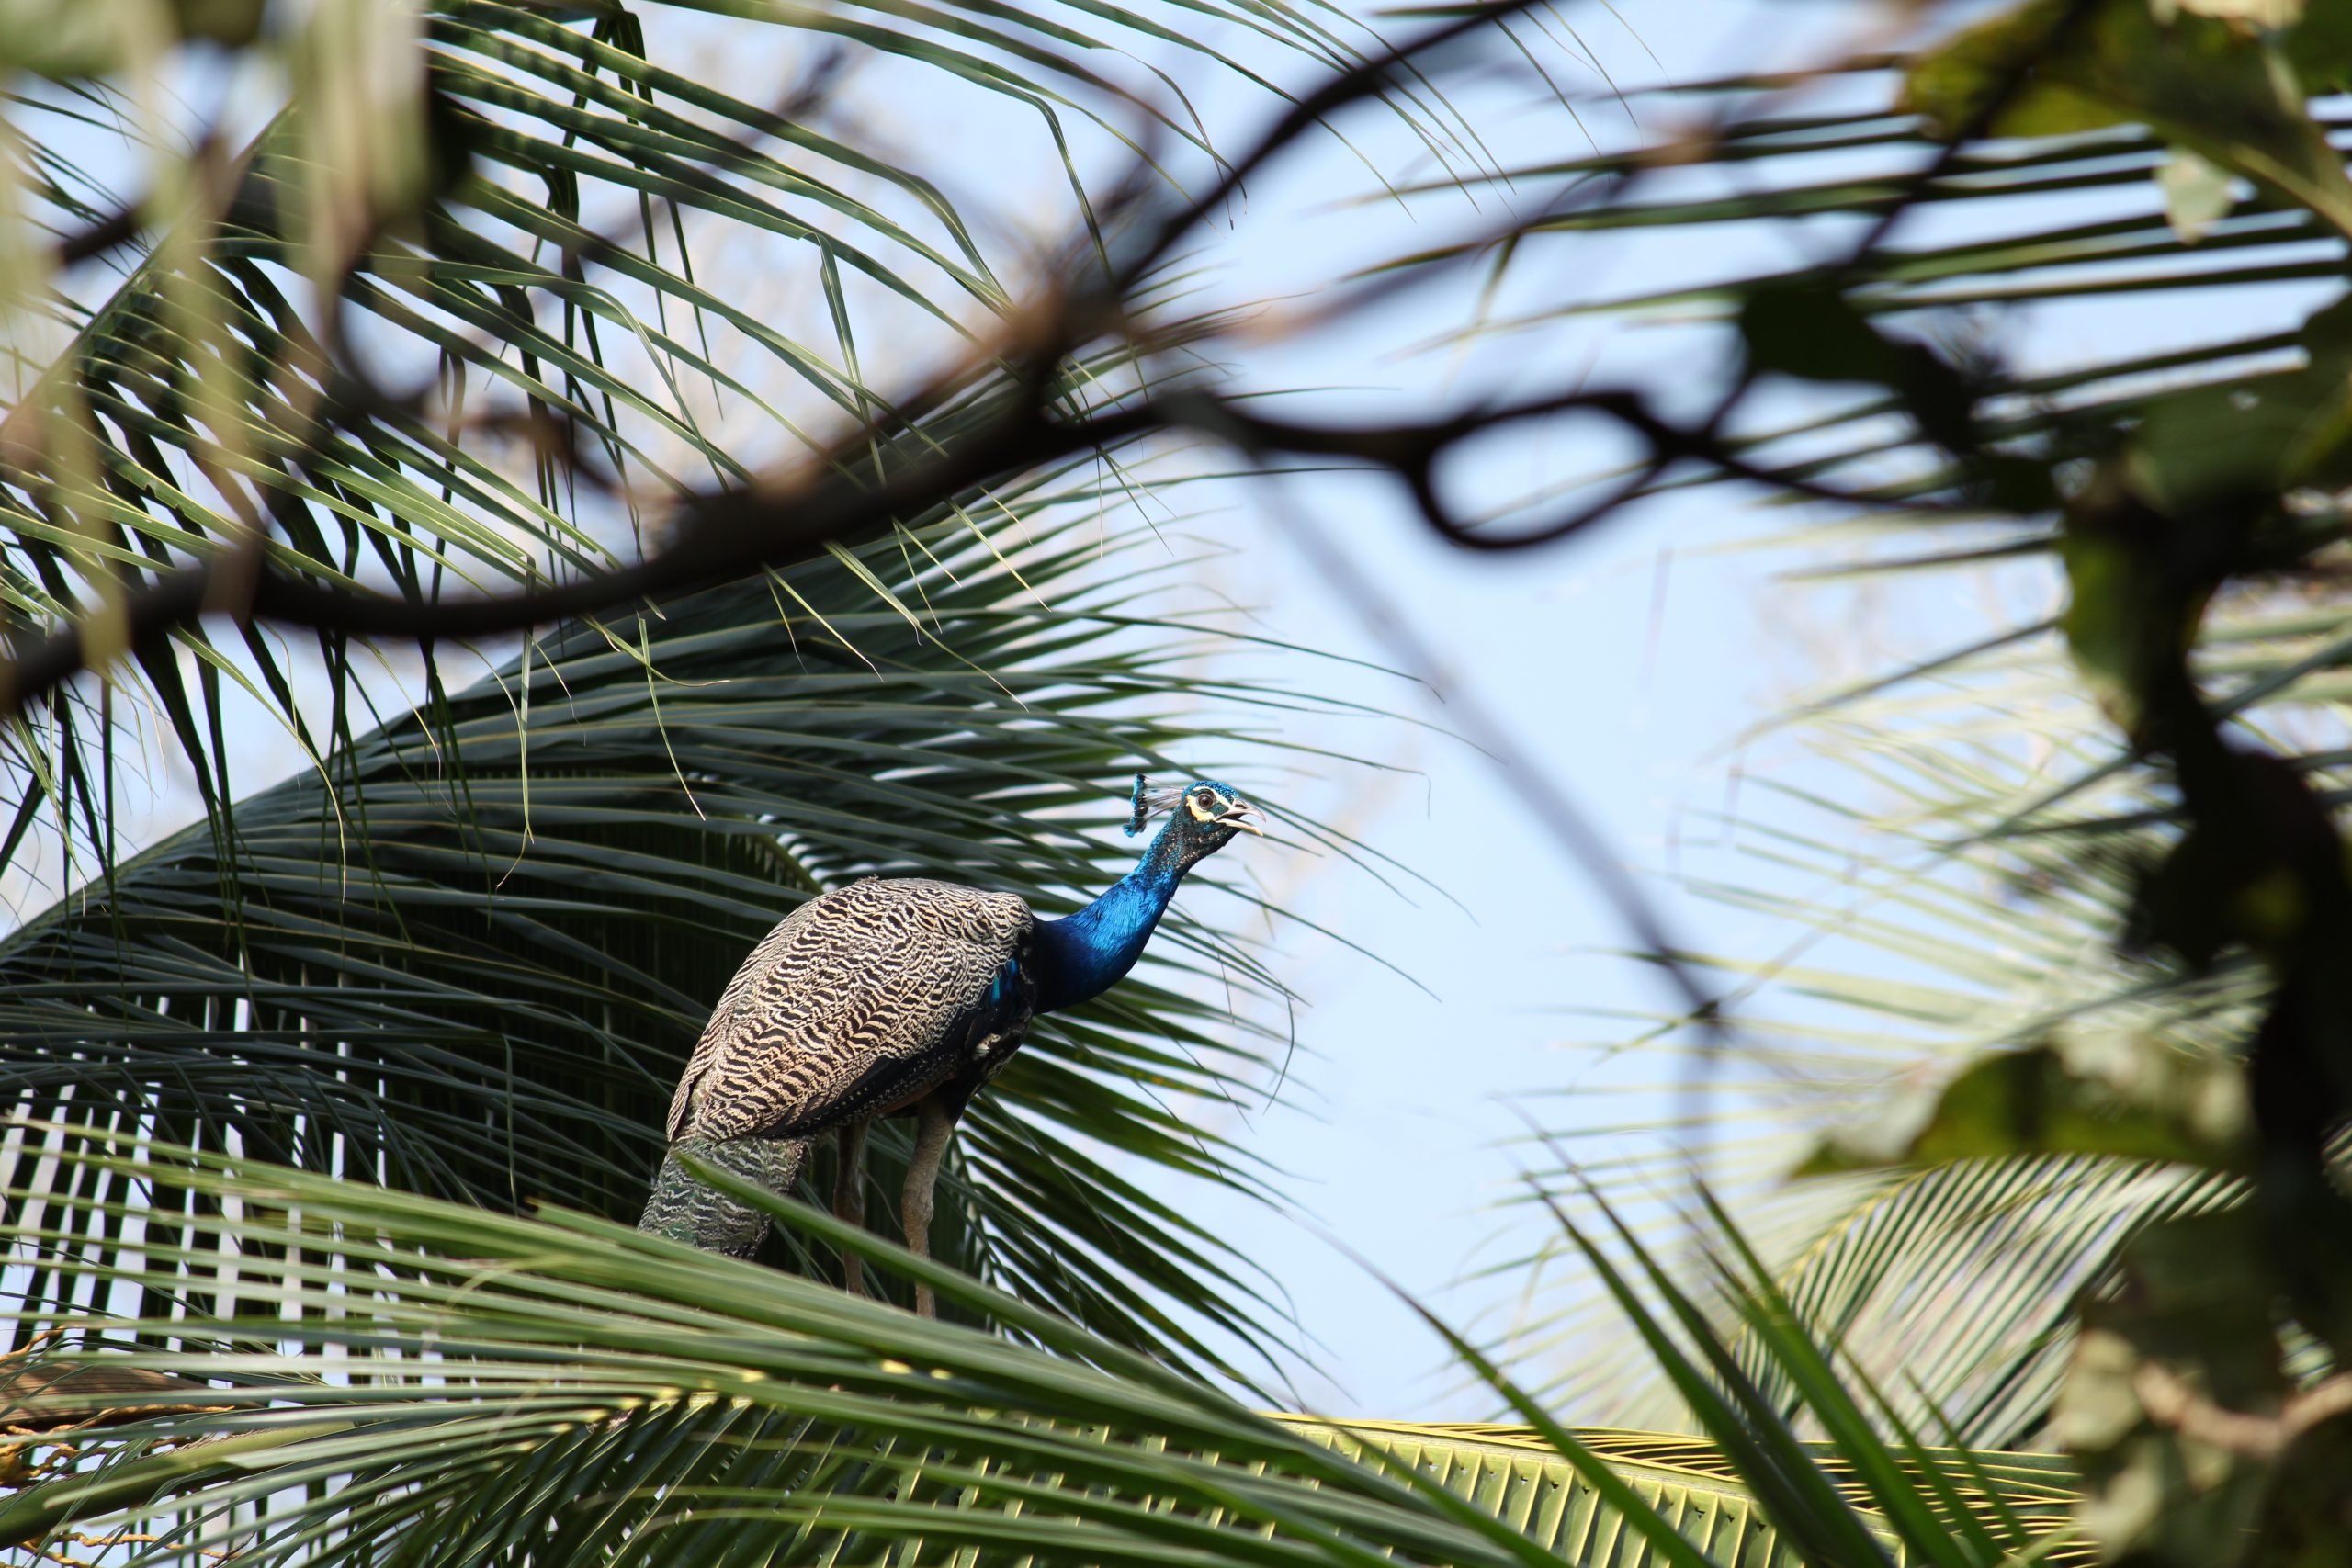 A peacock sitting on a tree.